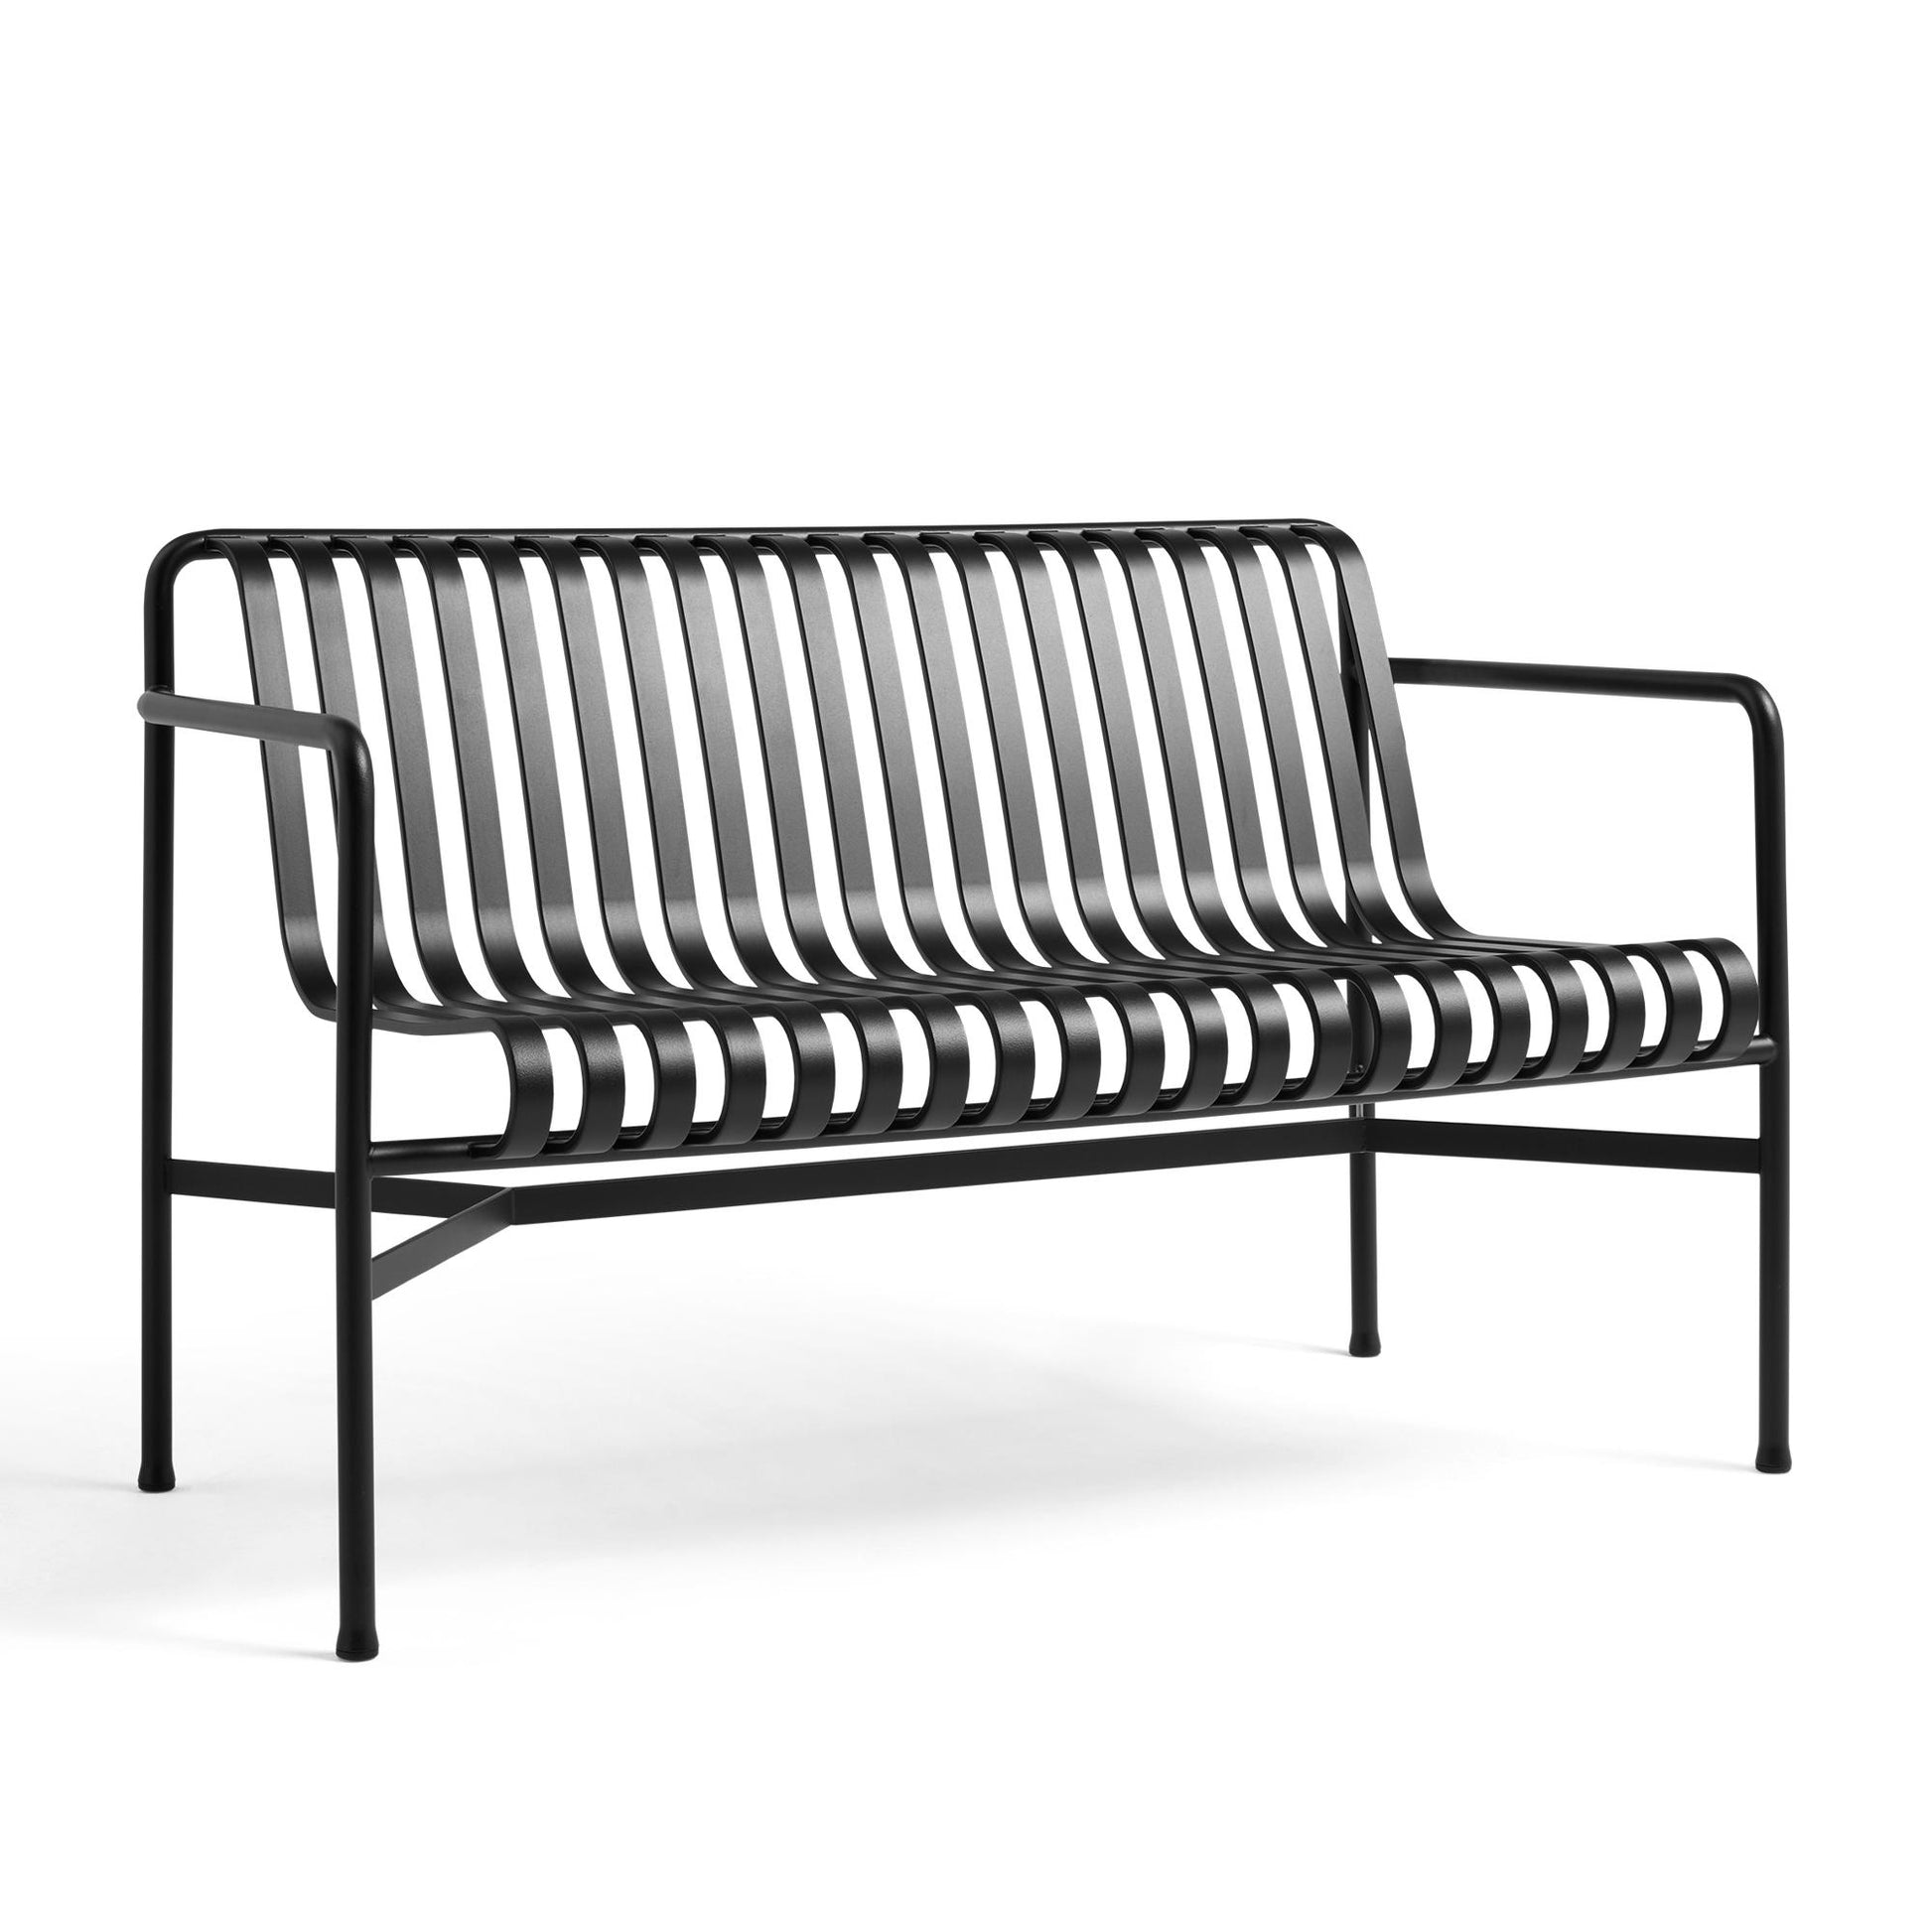 Palisade Dining Bench with Armrests by HAY #Anthracite